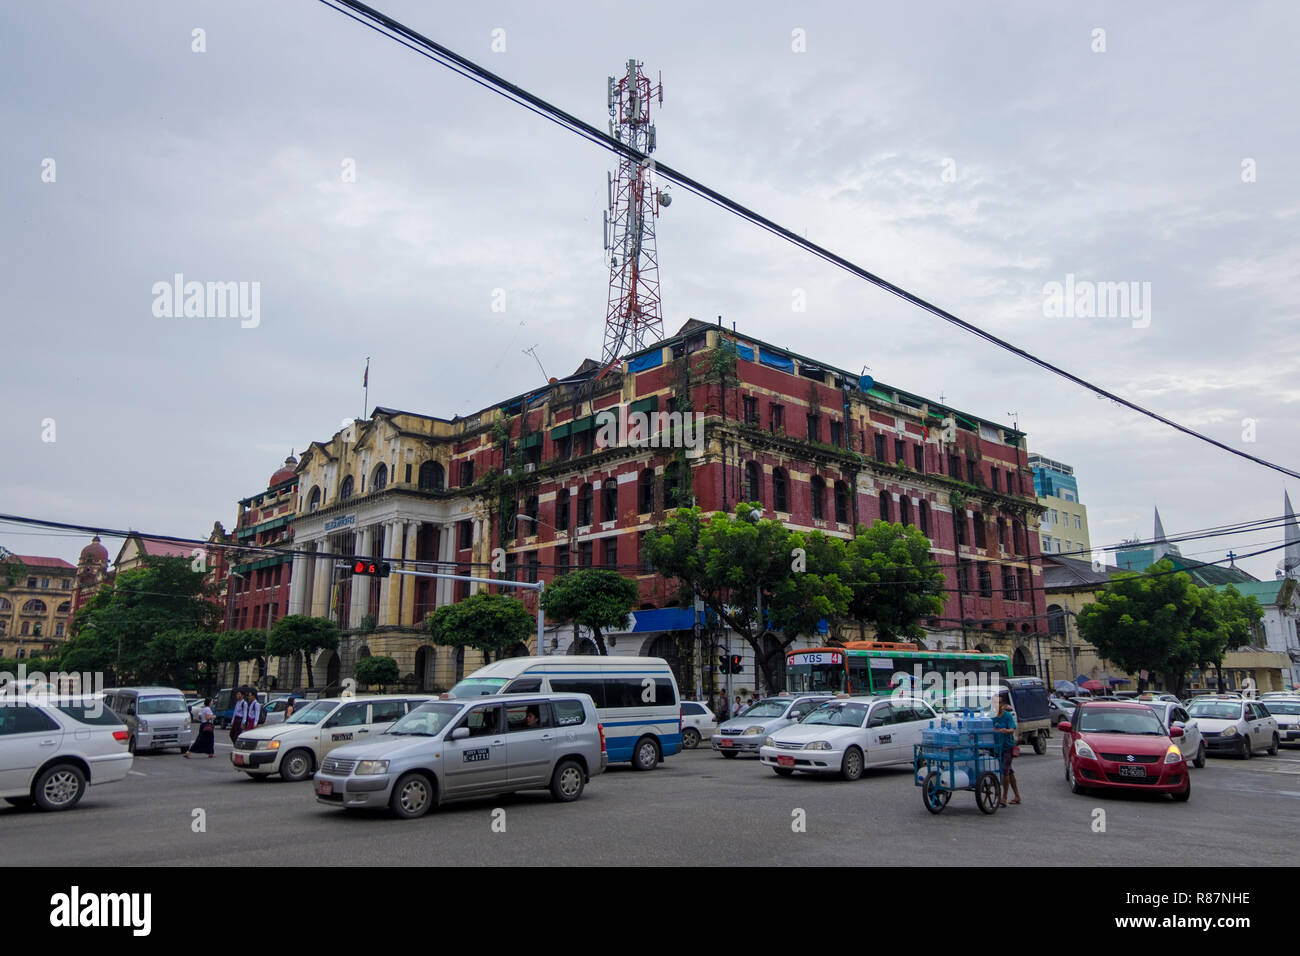 The Telegraph office building, an example of British Colonial Architecture in Yangon, Myanmar. Stock Photo